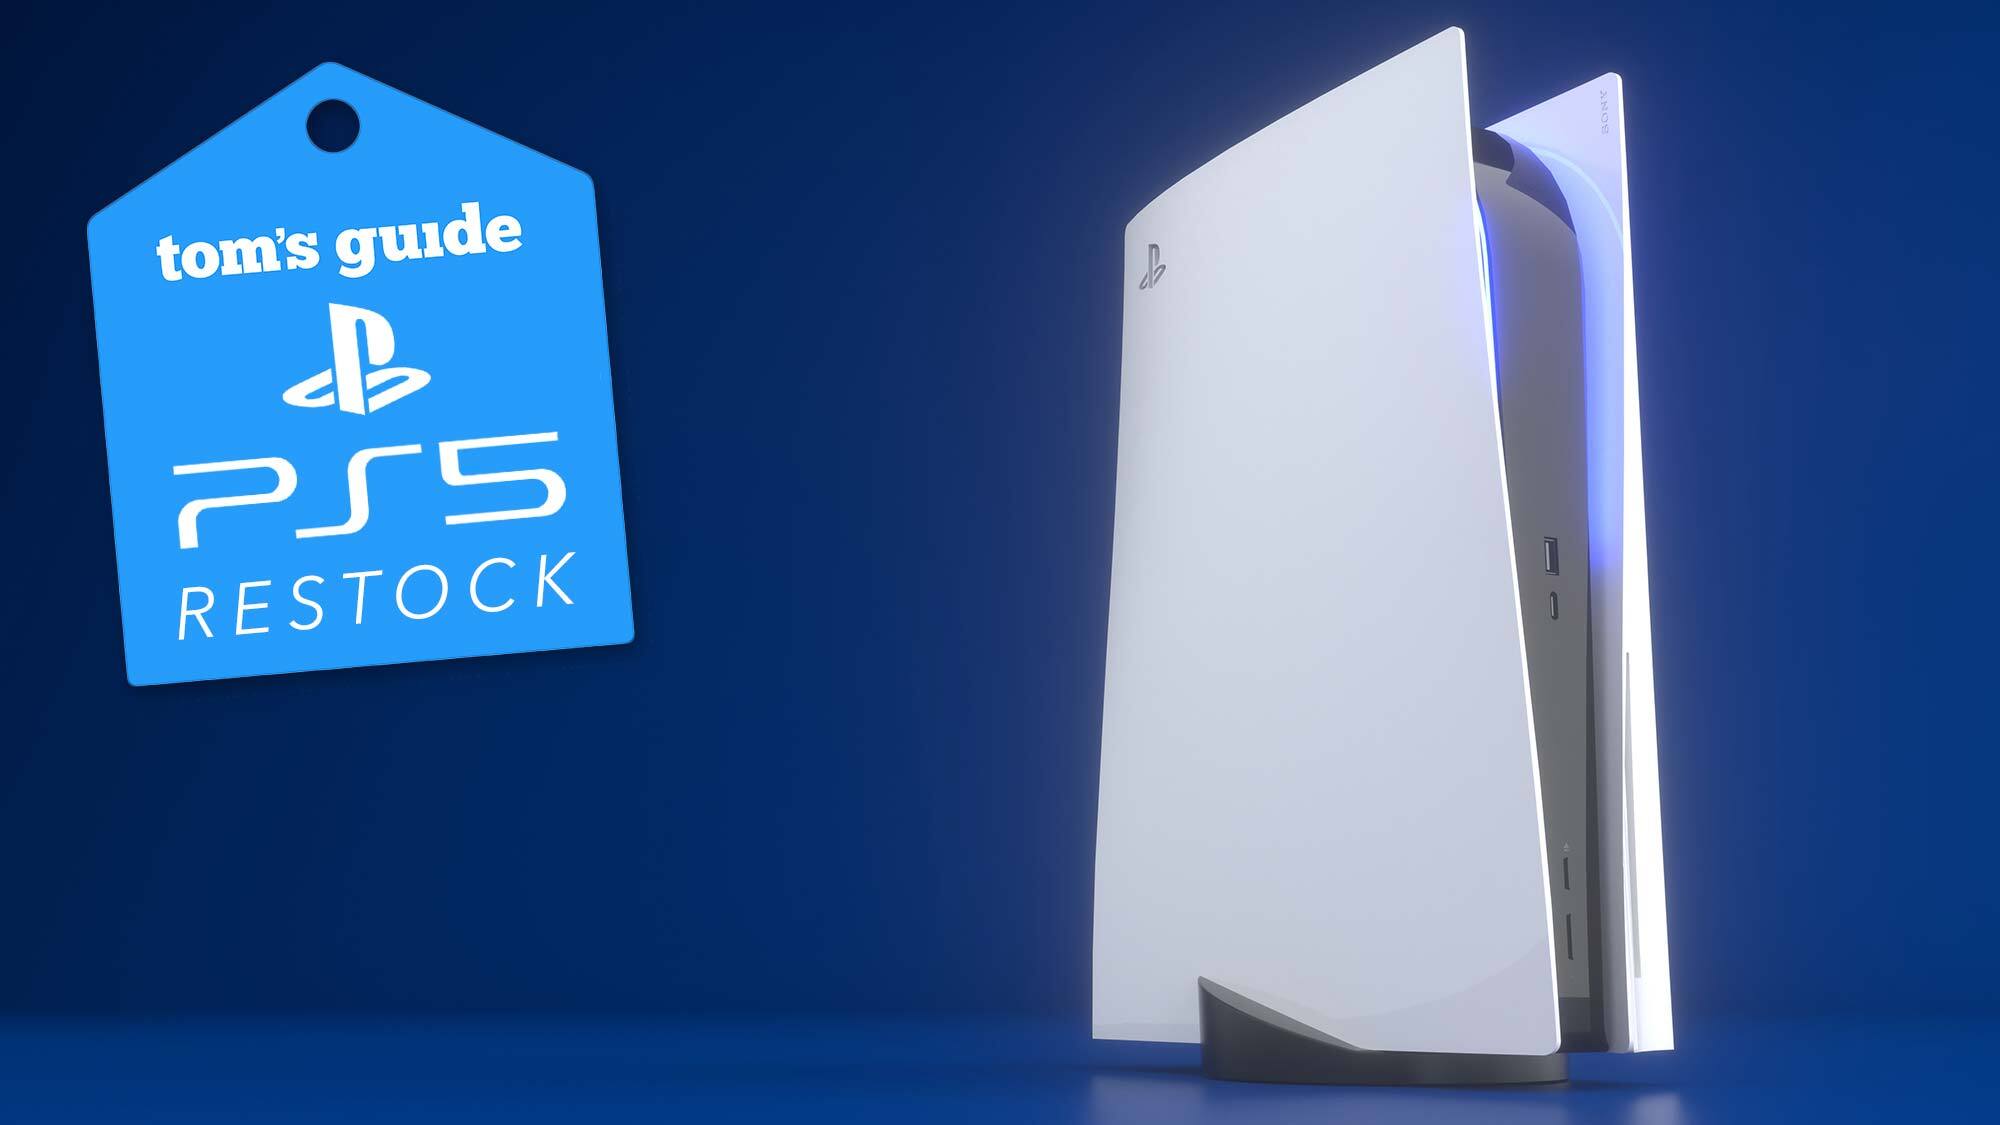 PS5 restock logo on a blue background, next to a PS5 console